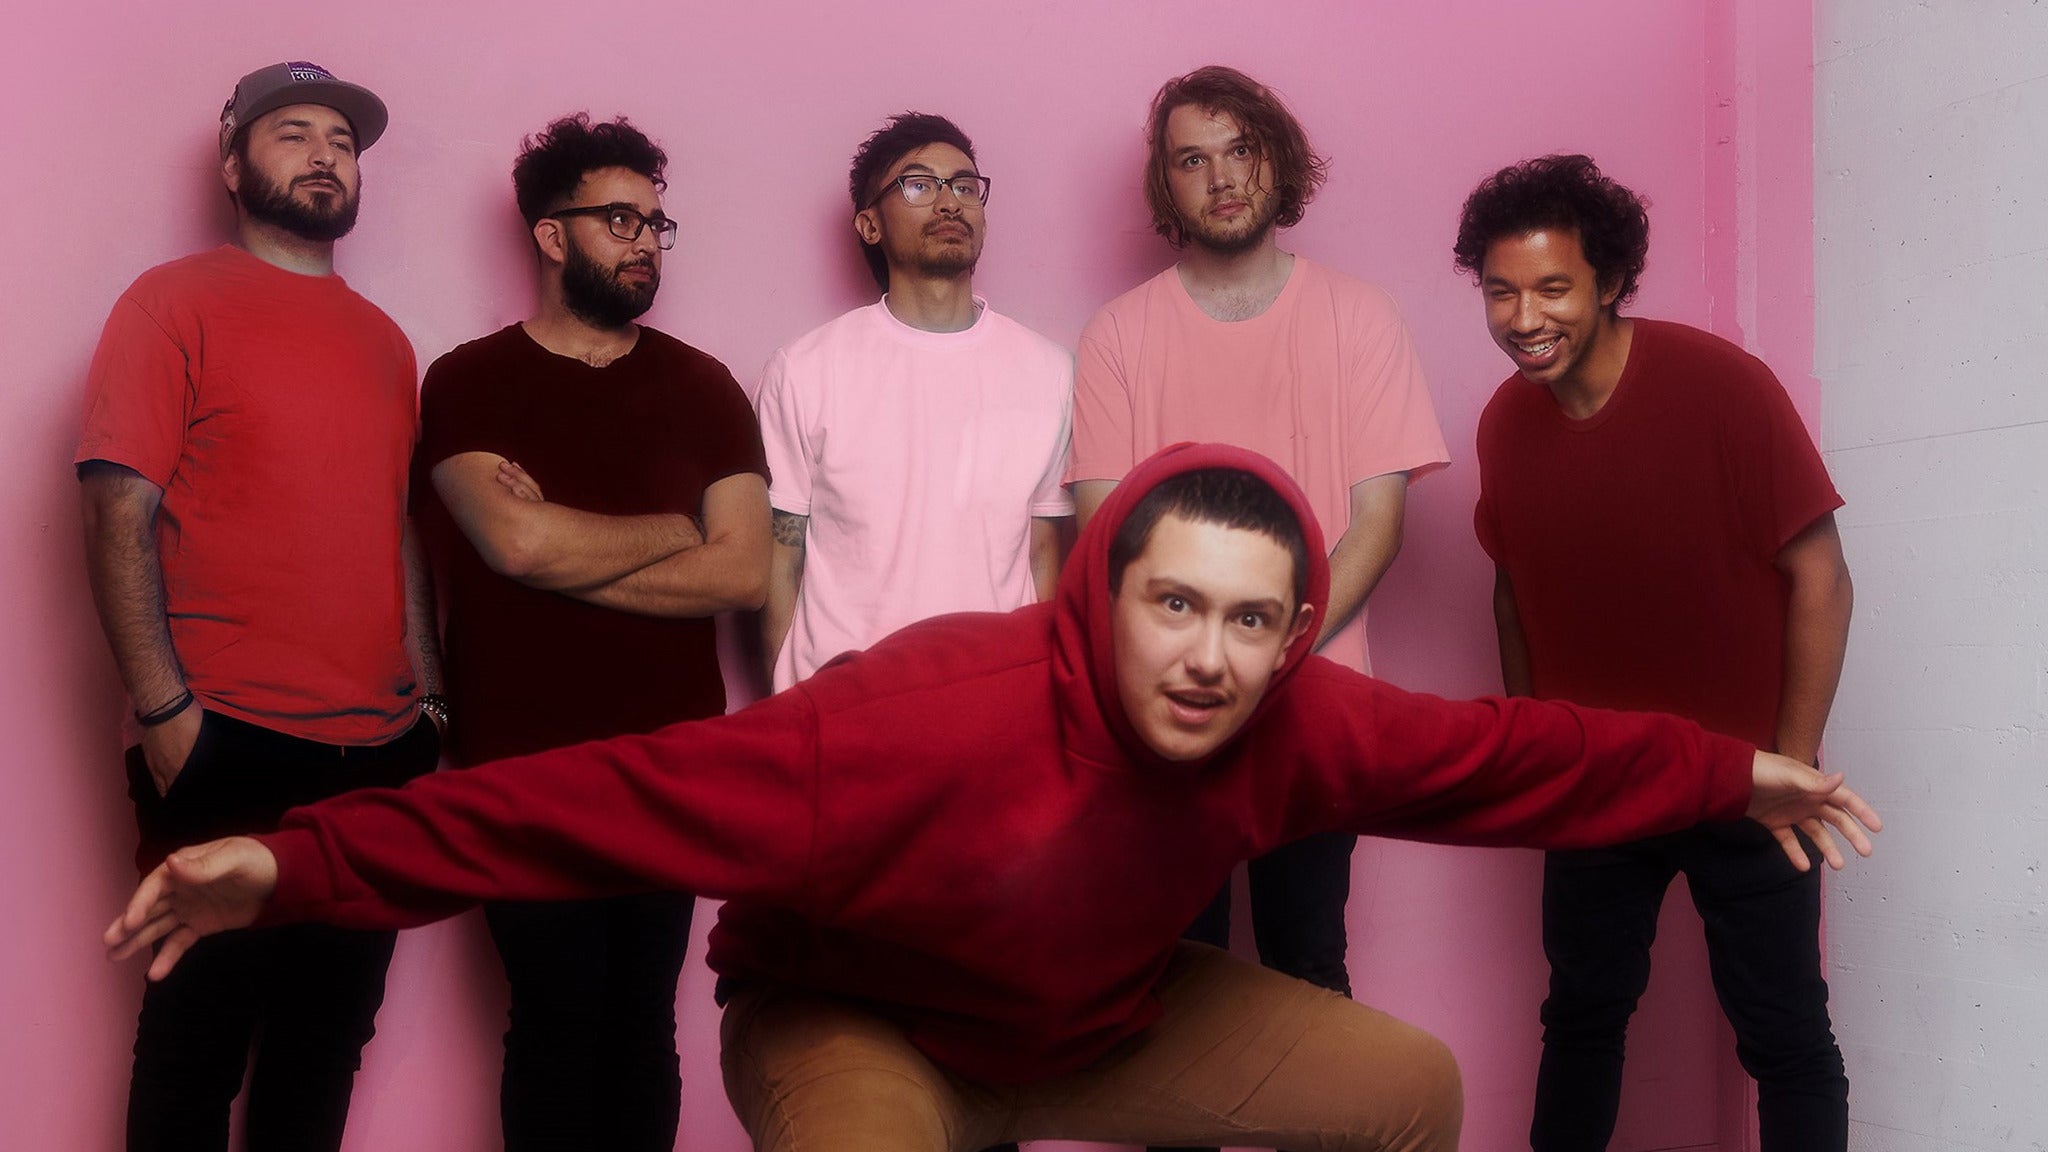 The Fall Tour of Hobo Johnson & the Lovemakers in Sacramento promo photo for Live Nation Mobile App presale offer code